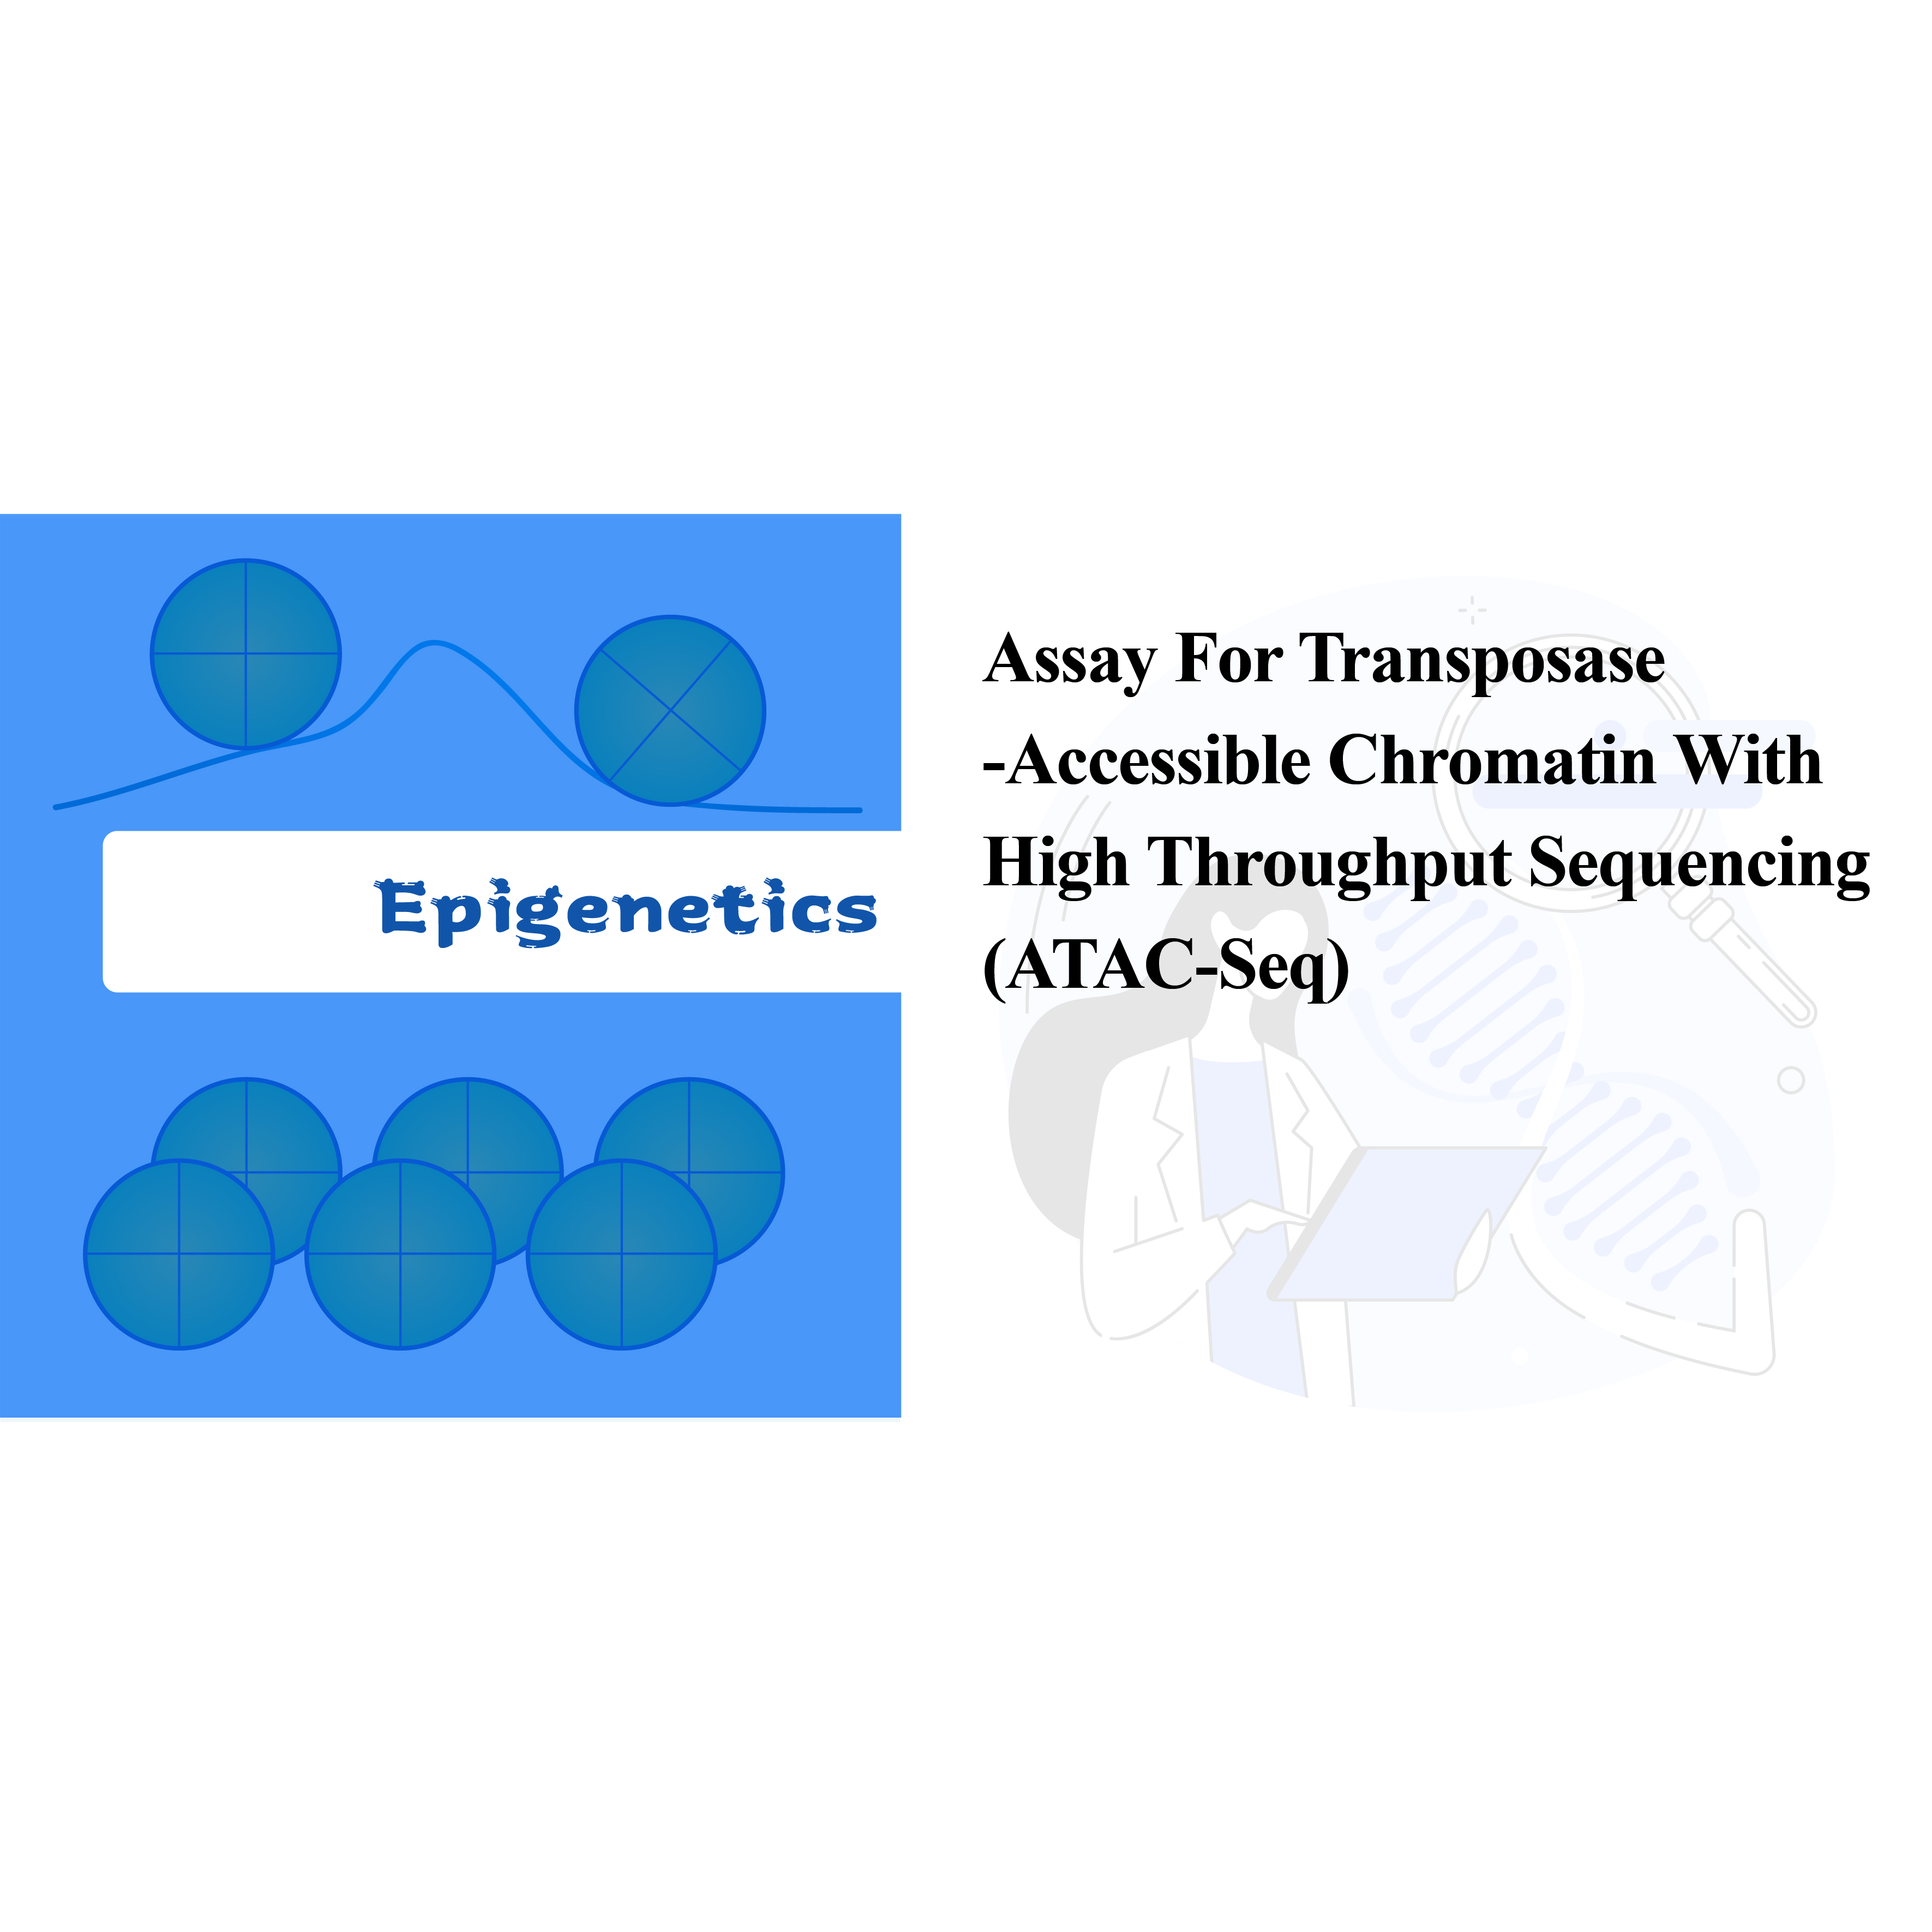 Assay for Transposase-Accessible Chromatin with High Throughput Sequencing (ATAC-seq) Featured Image